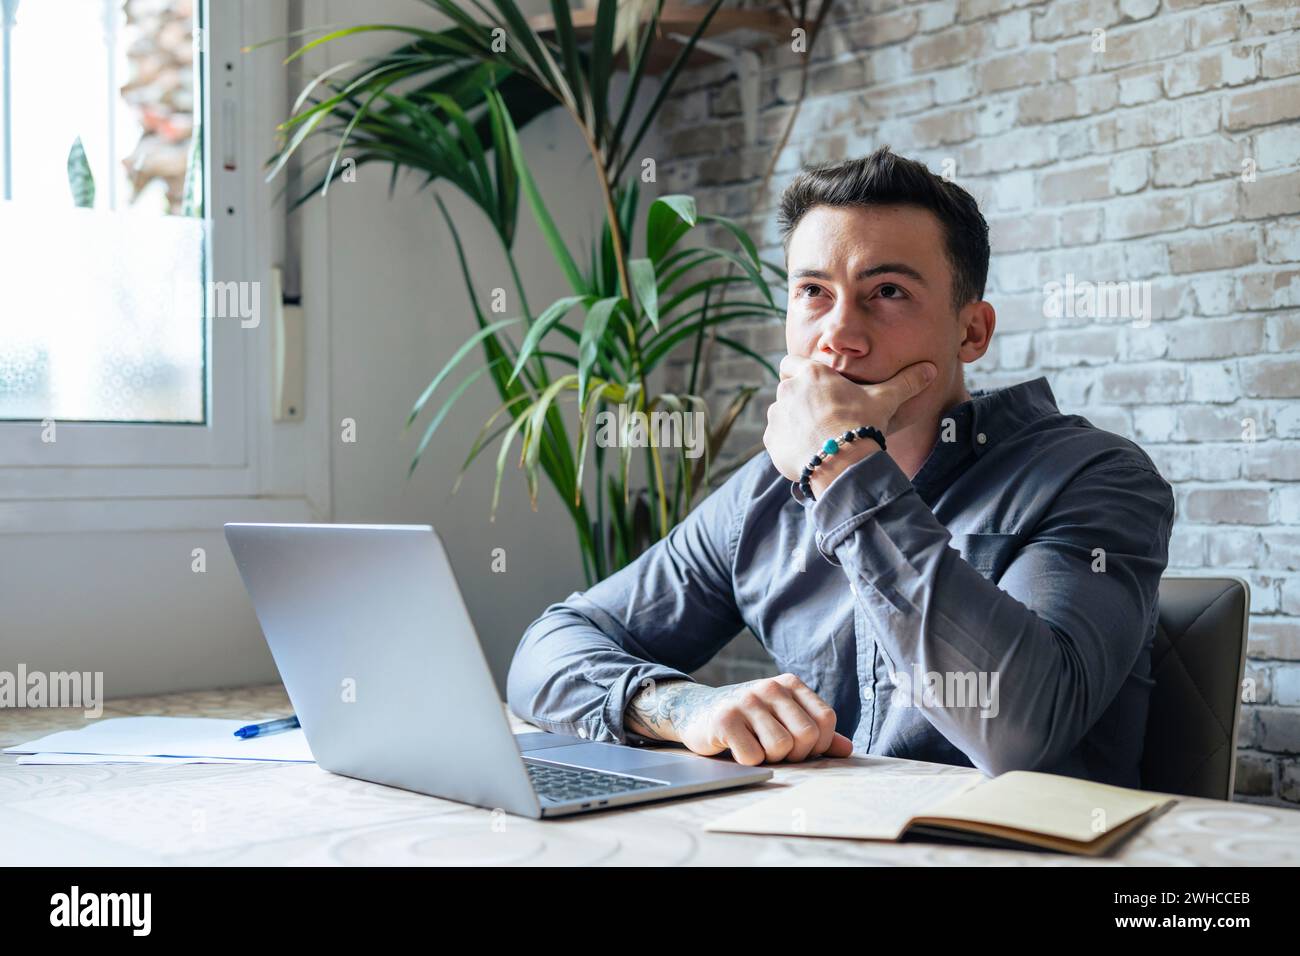 Thoughtful businessman touching chin, pondering ideas or strategy, sitting at wooden work desk with laptop, freelancer working on online project, student preparing for exam at home Stock Photo